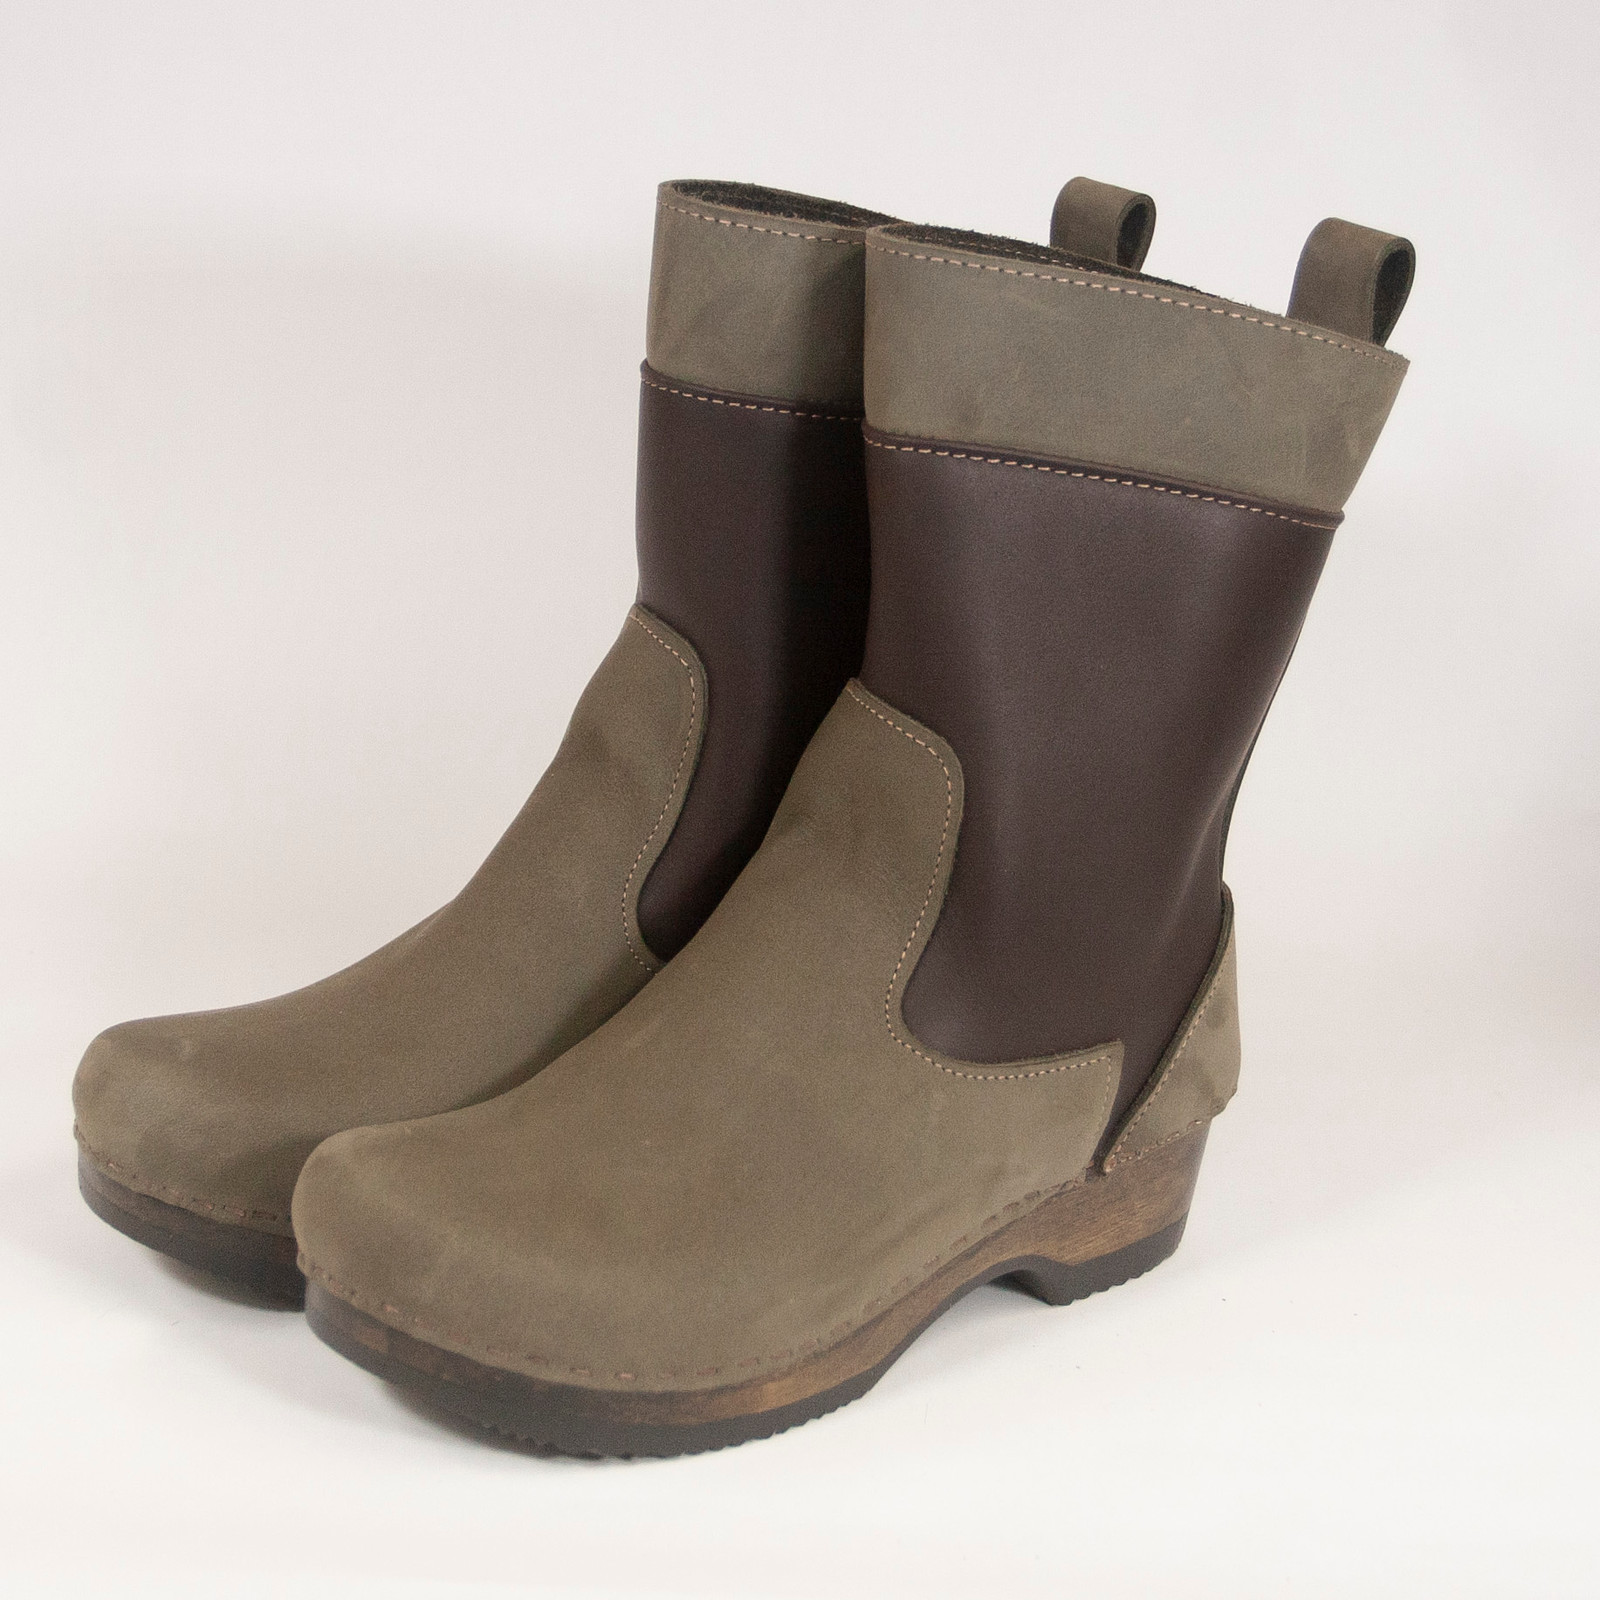 Anne Clog Booties - Olive & Fudge - All Leather